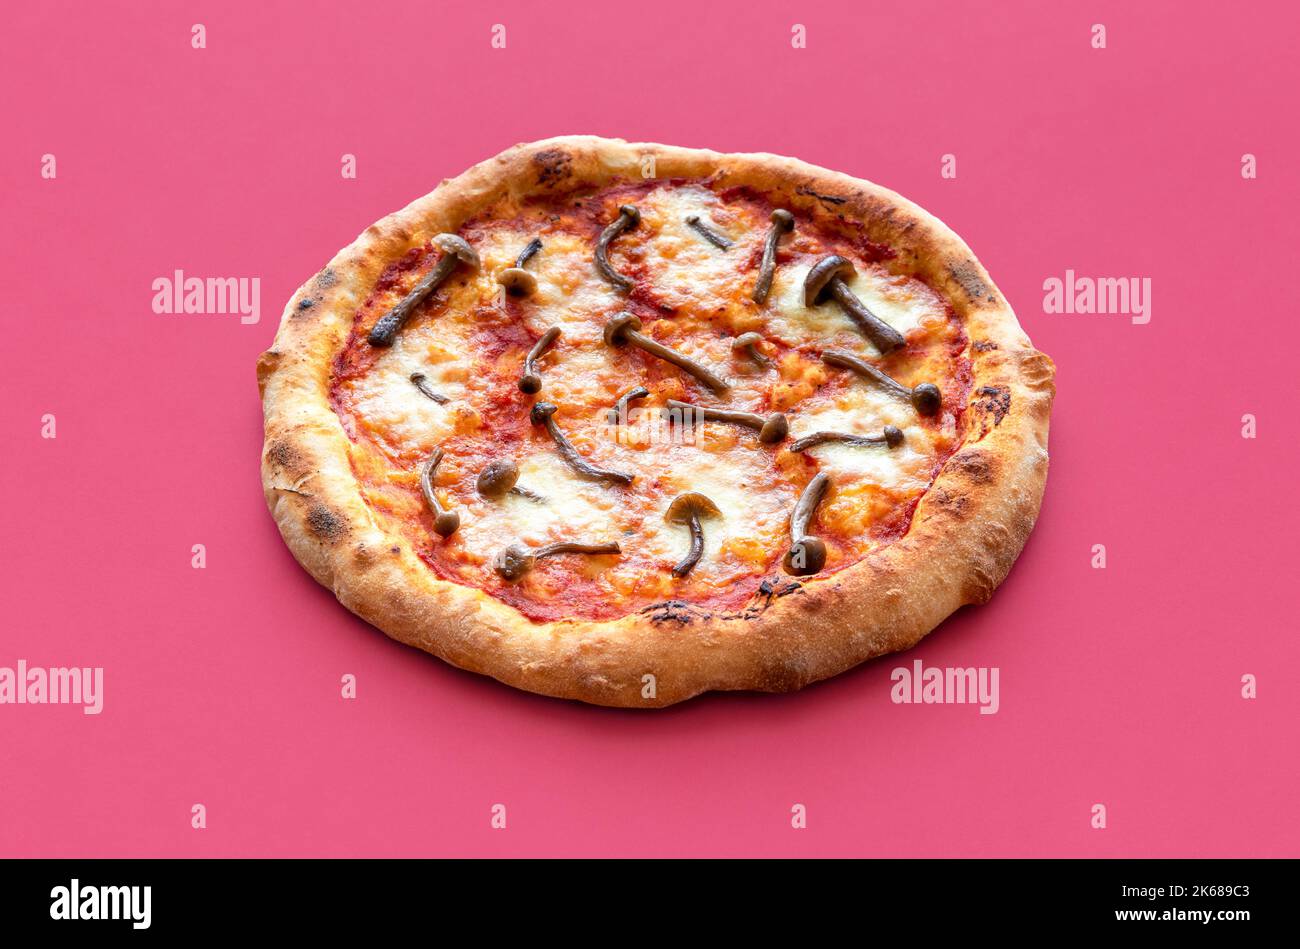 Close-up with a delicious homemade pizza isolated on a magenta-colored background. Vegetarian pizza with forest mushrooms Stock Photo